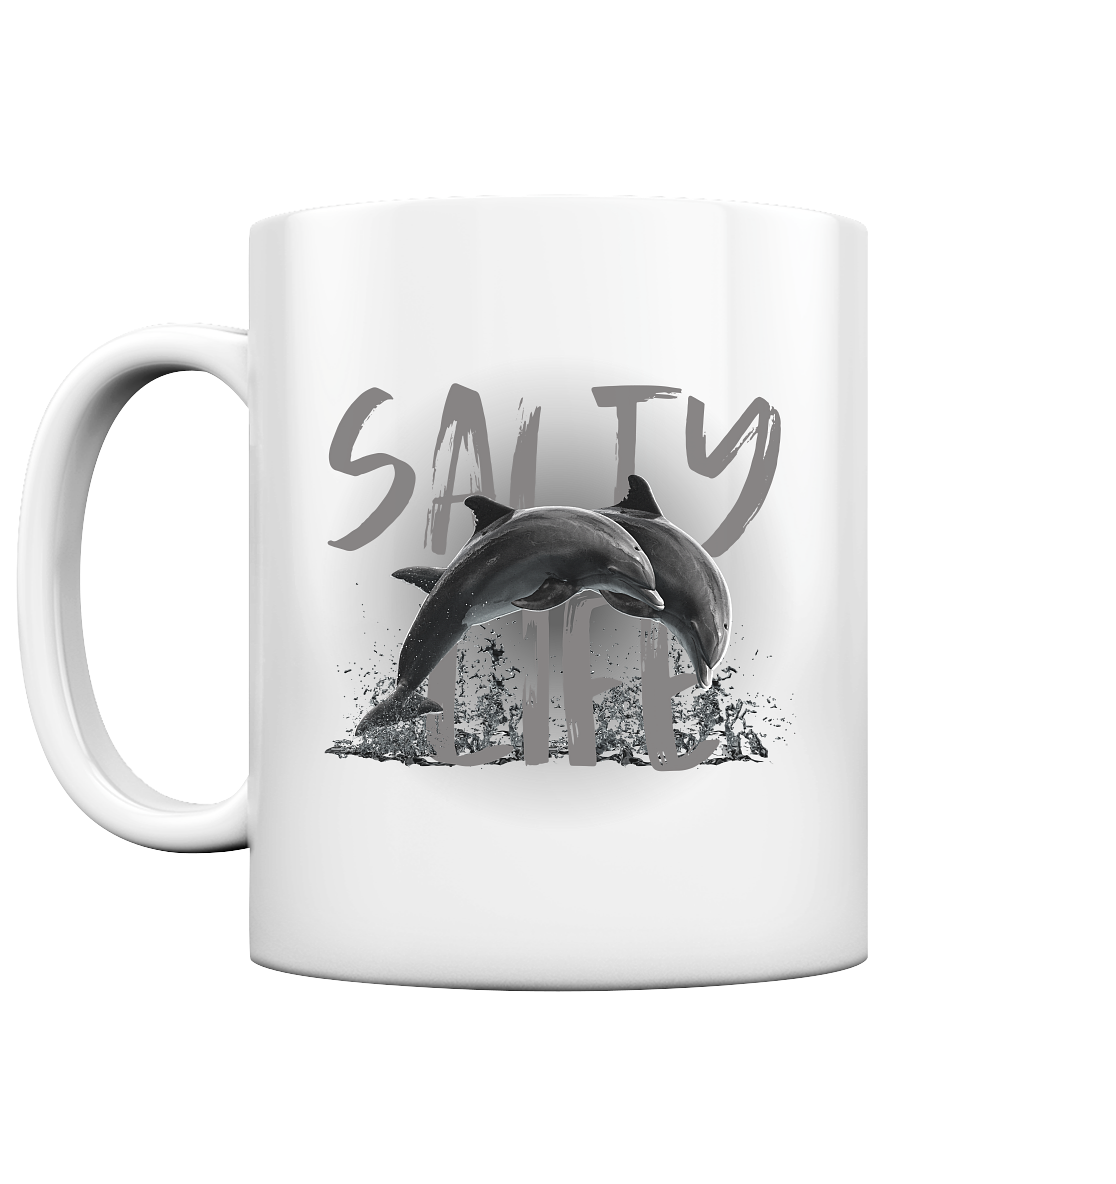 Salty Life "Dolphins" - Tasse glossy